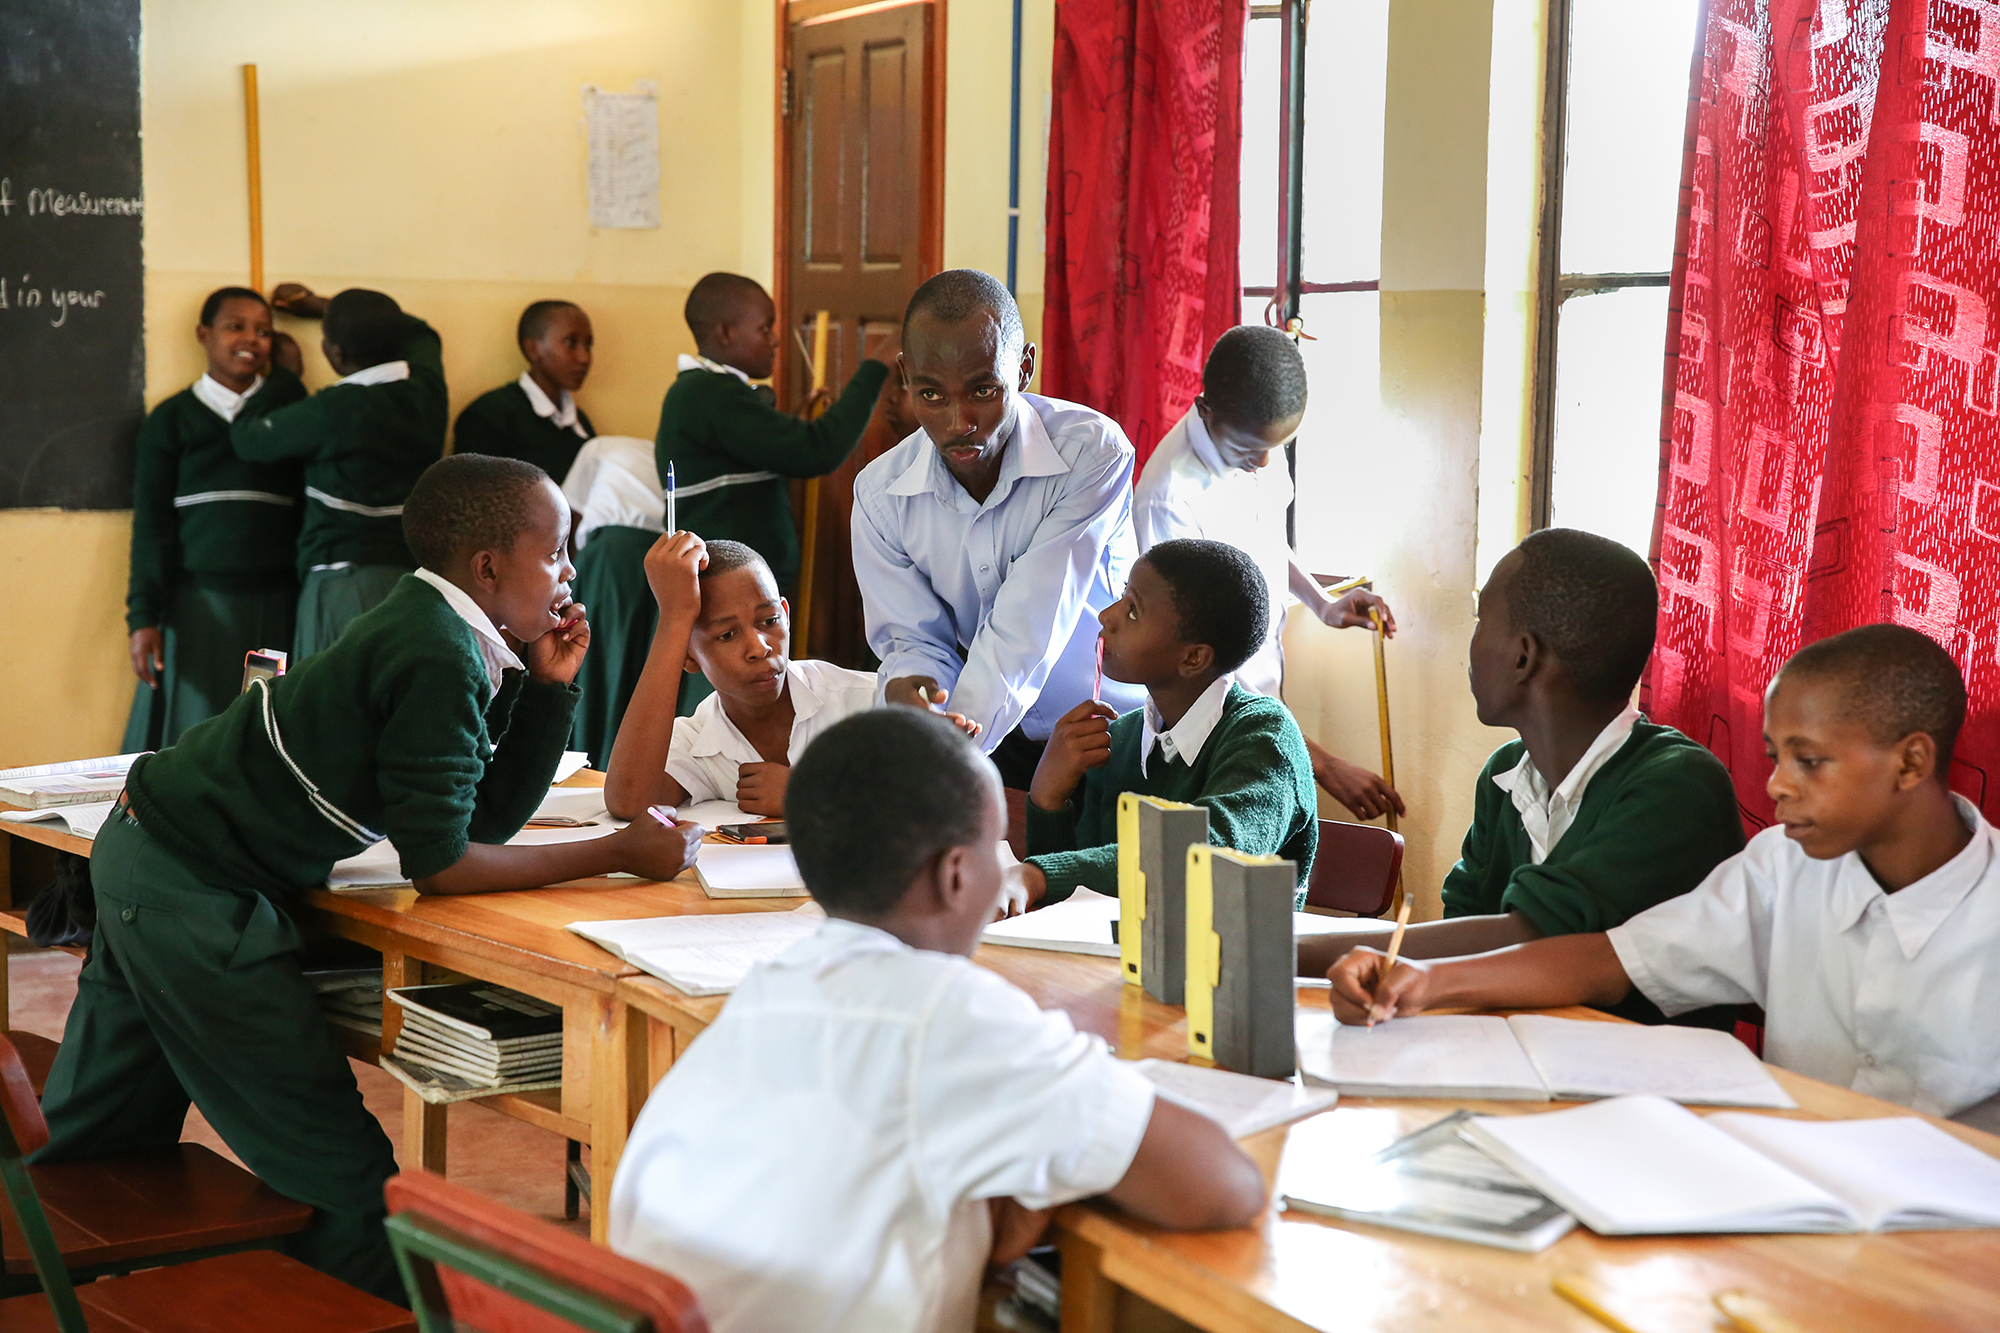 A busy, colorful classroom in Tanzania shows students in small groups learning actively.